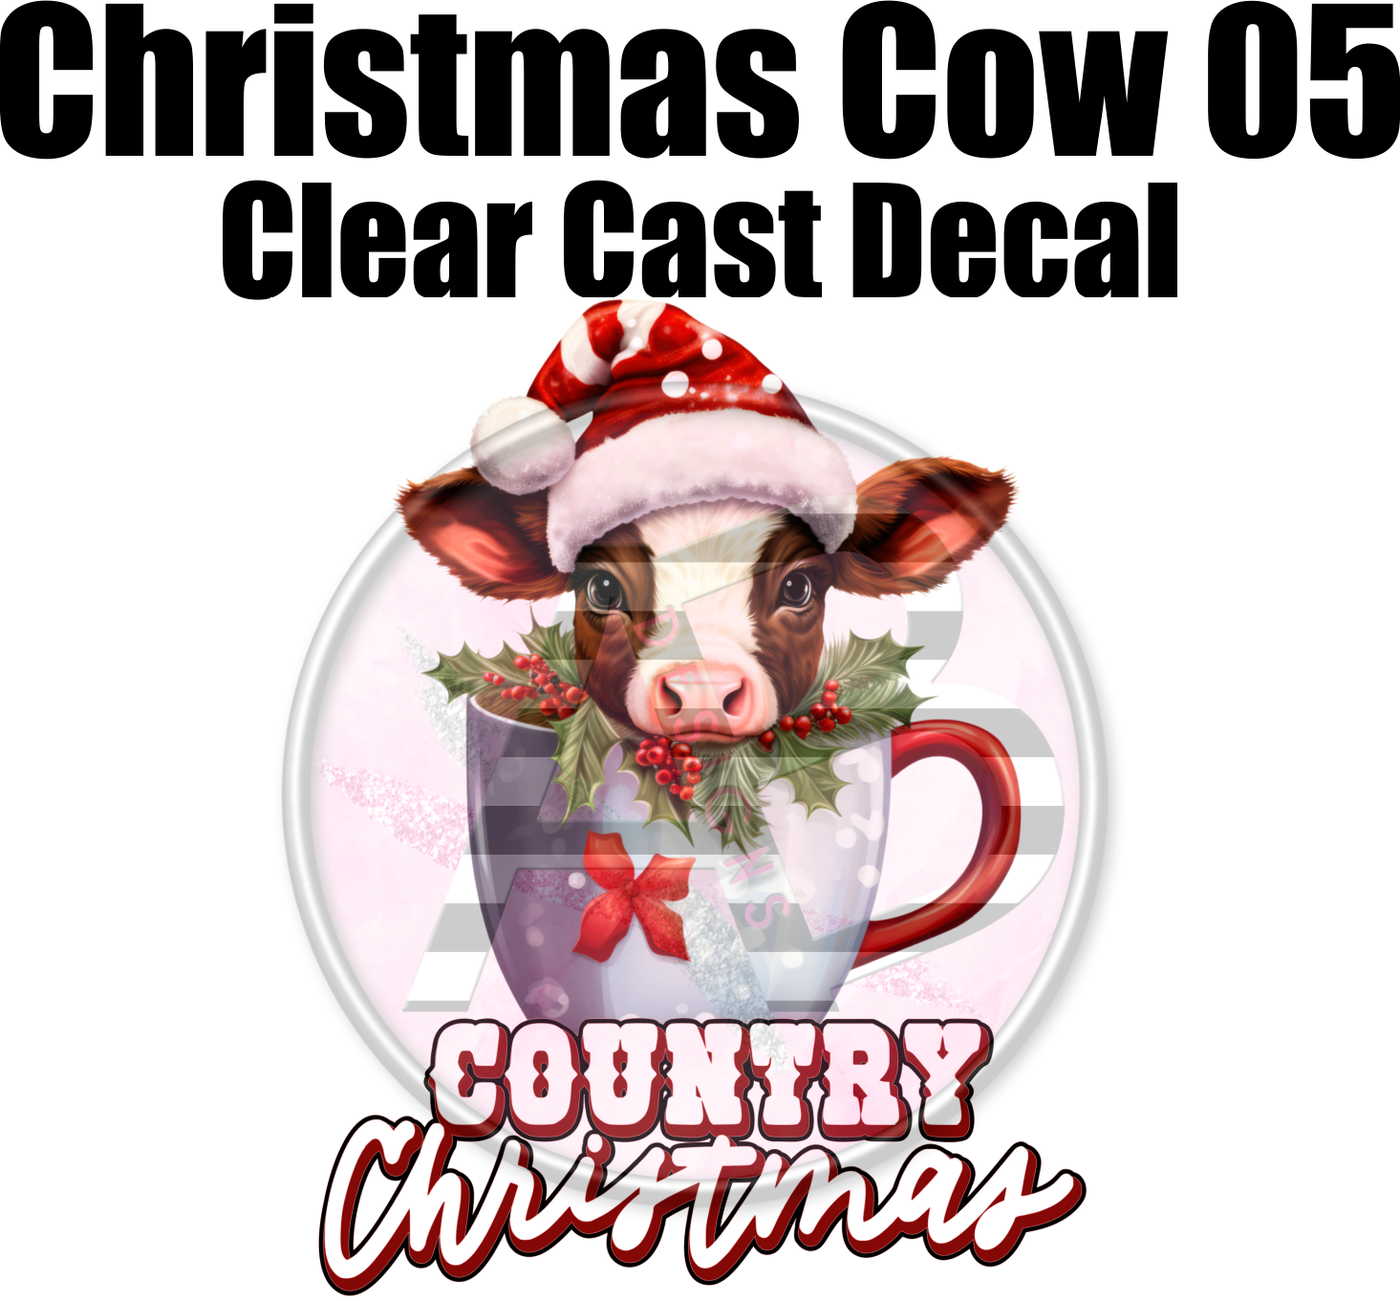 Christmas Cow Collab 05 - Clear Cast Decal